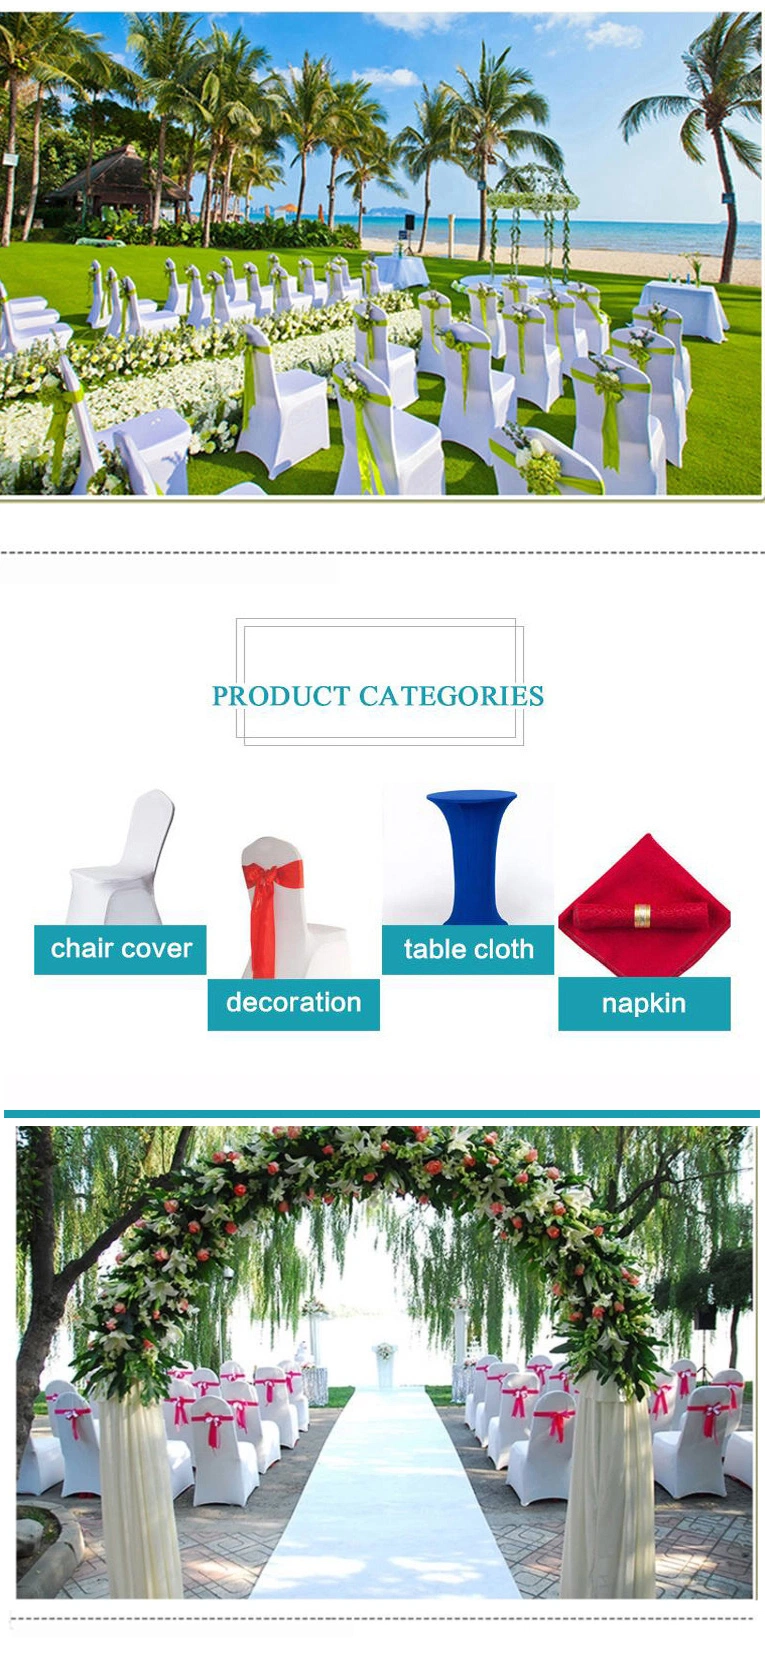 Guangzhou Foshan Wedding Spandex Chair Cover 50 Pieces on Factory Price for Wedding Party for Yrf